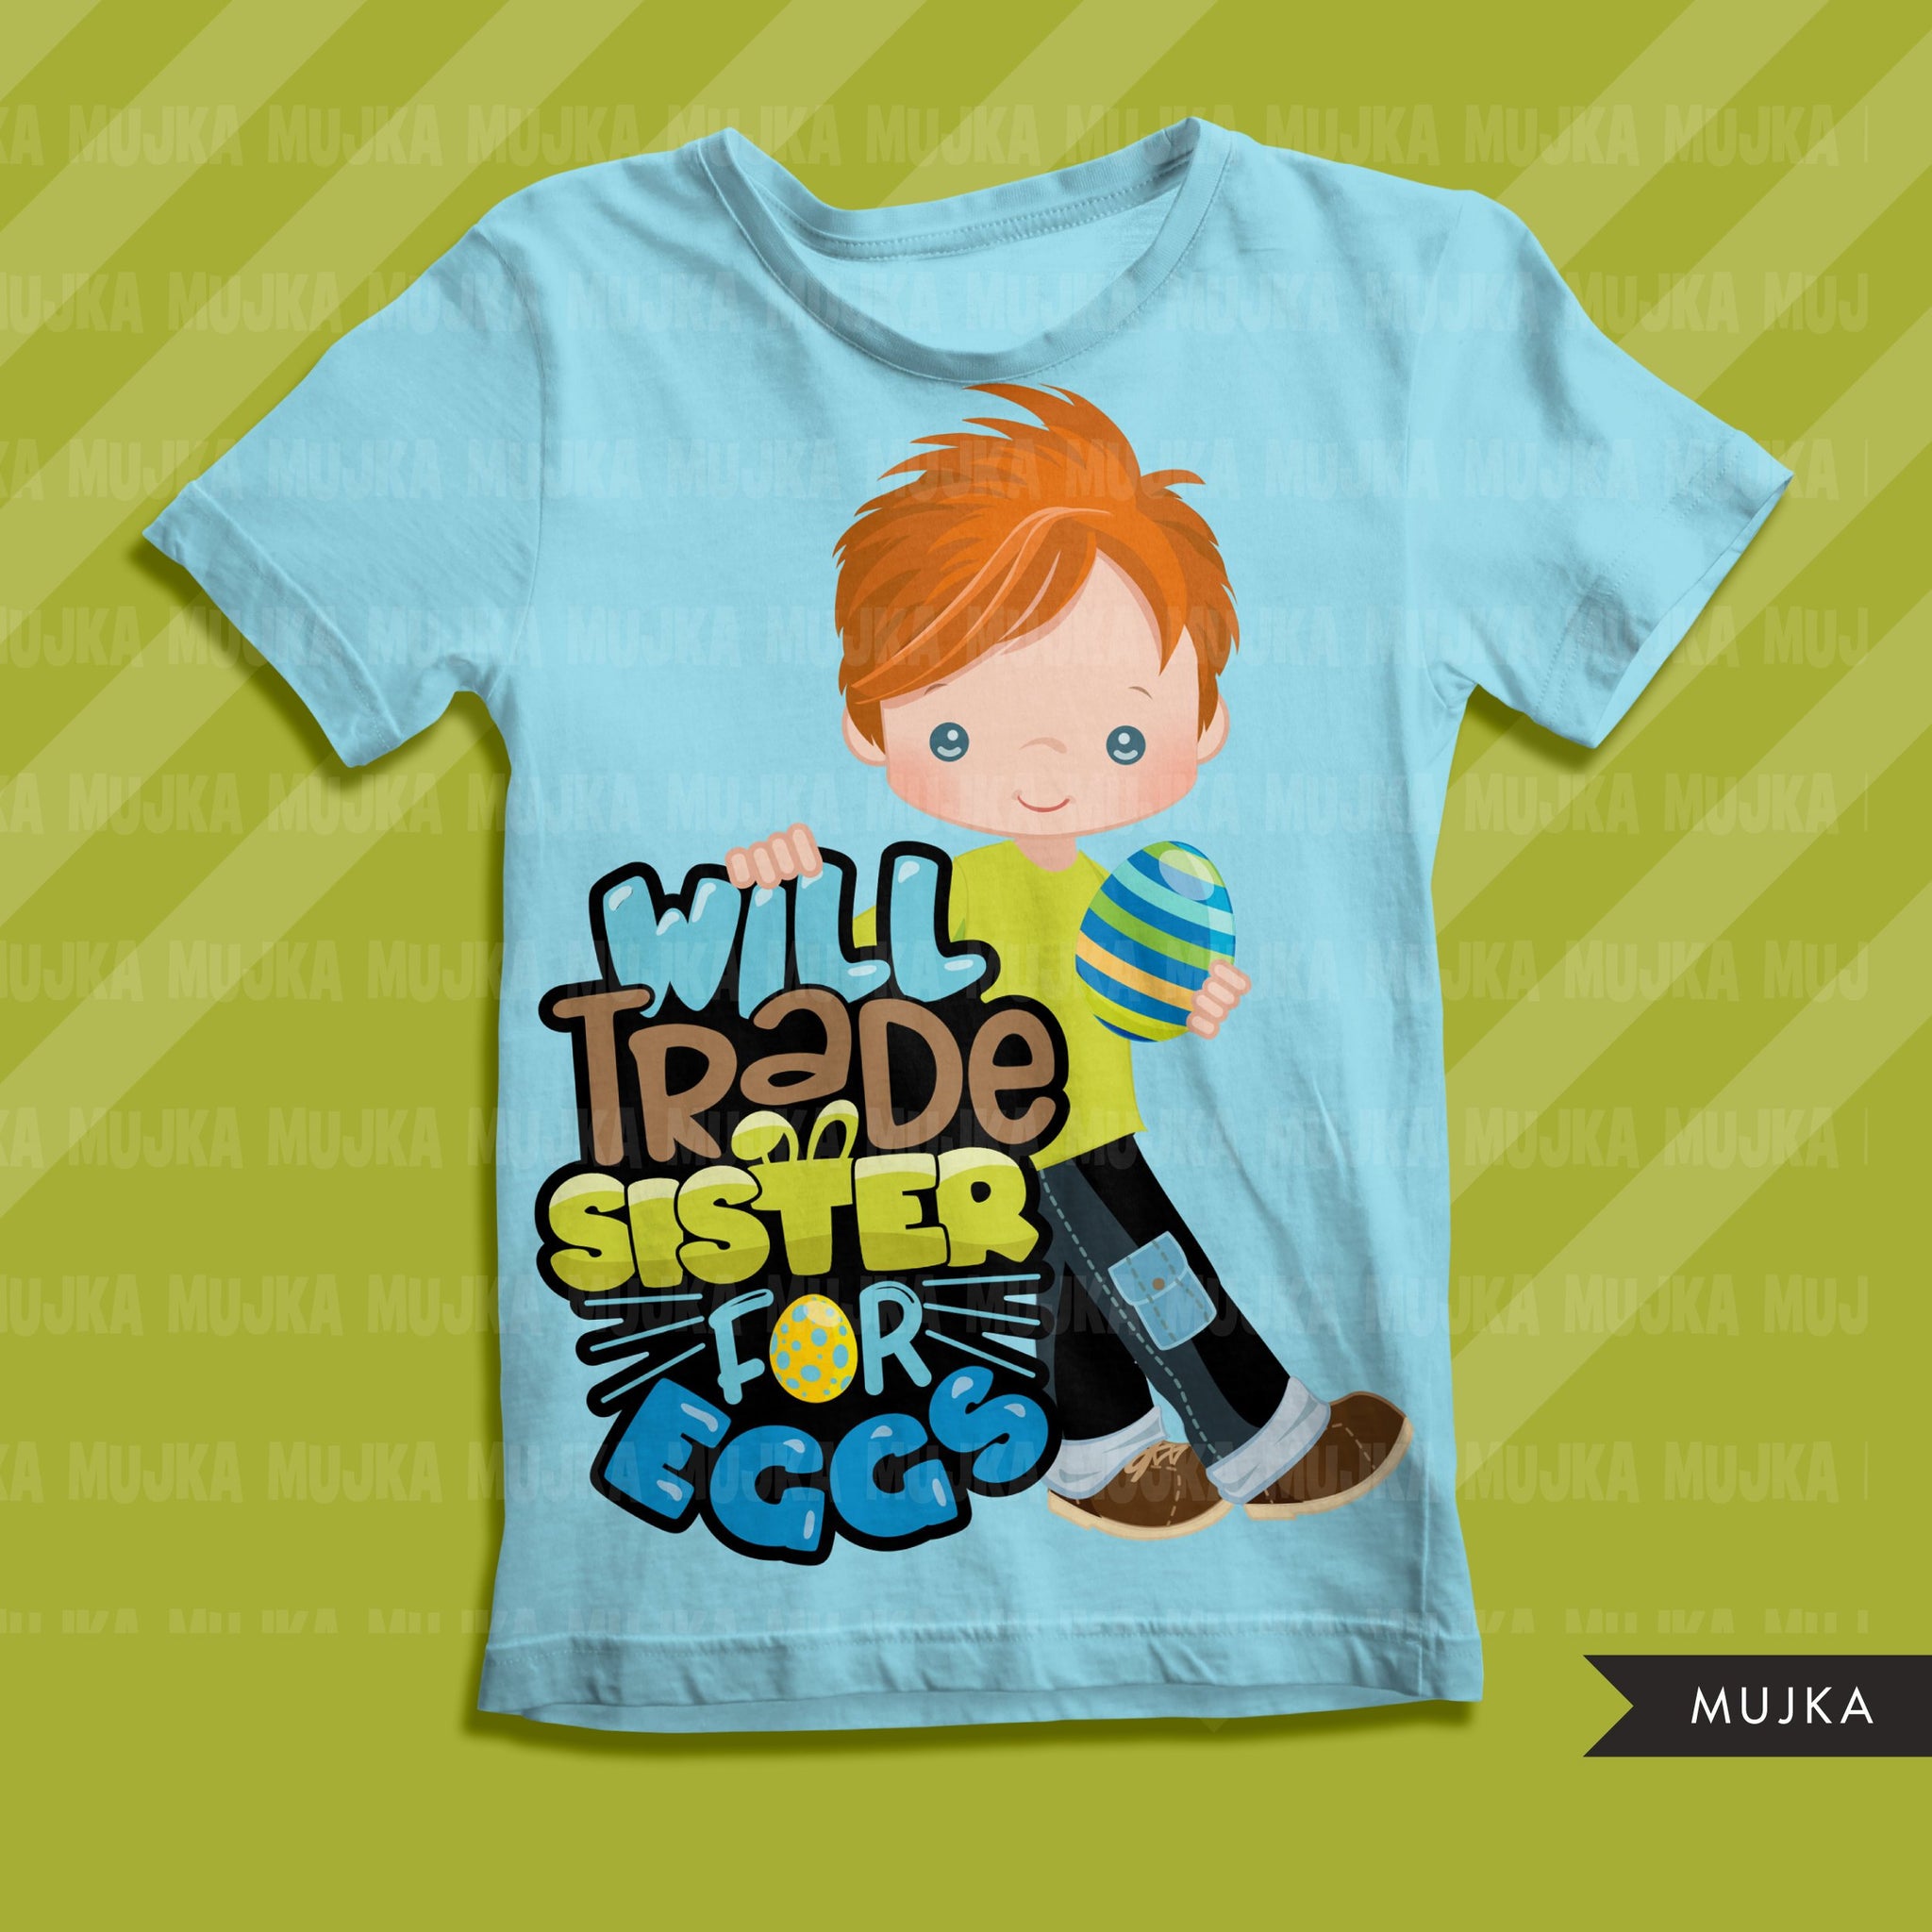 Easter PNG digital, Will trade sister for eggs Printable HTV sublimation image transfer clipart, t-shirt boy graphics